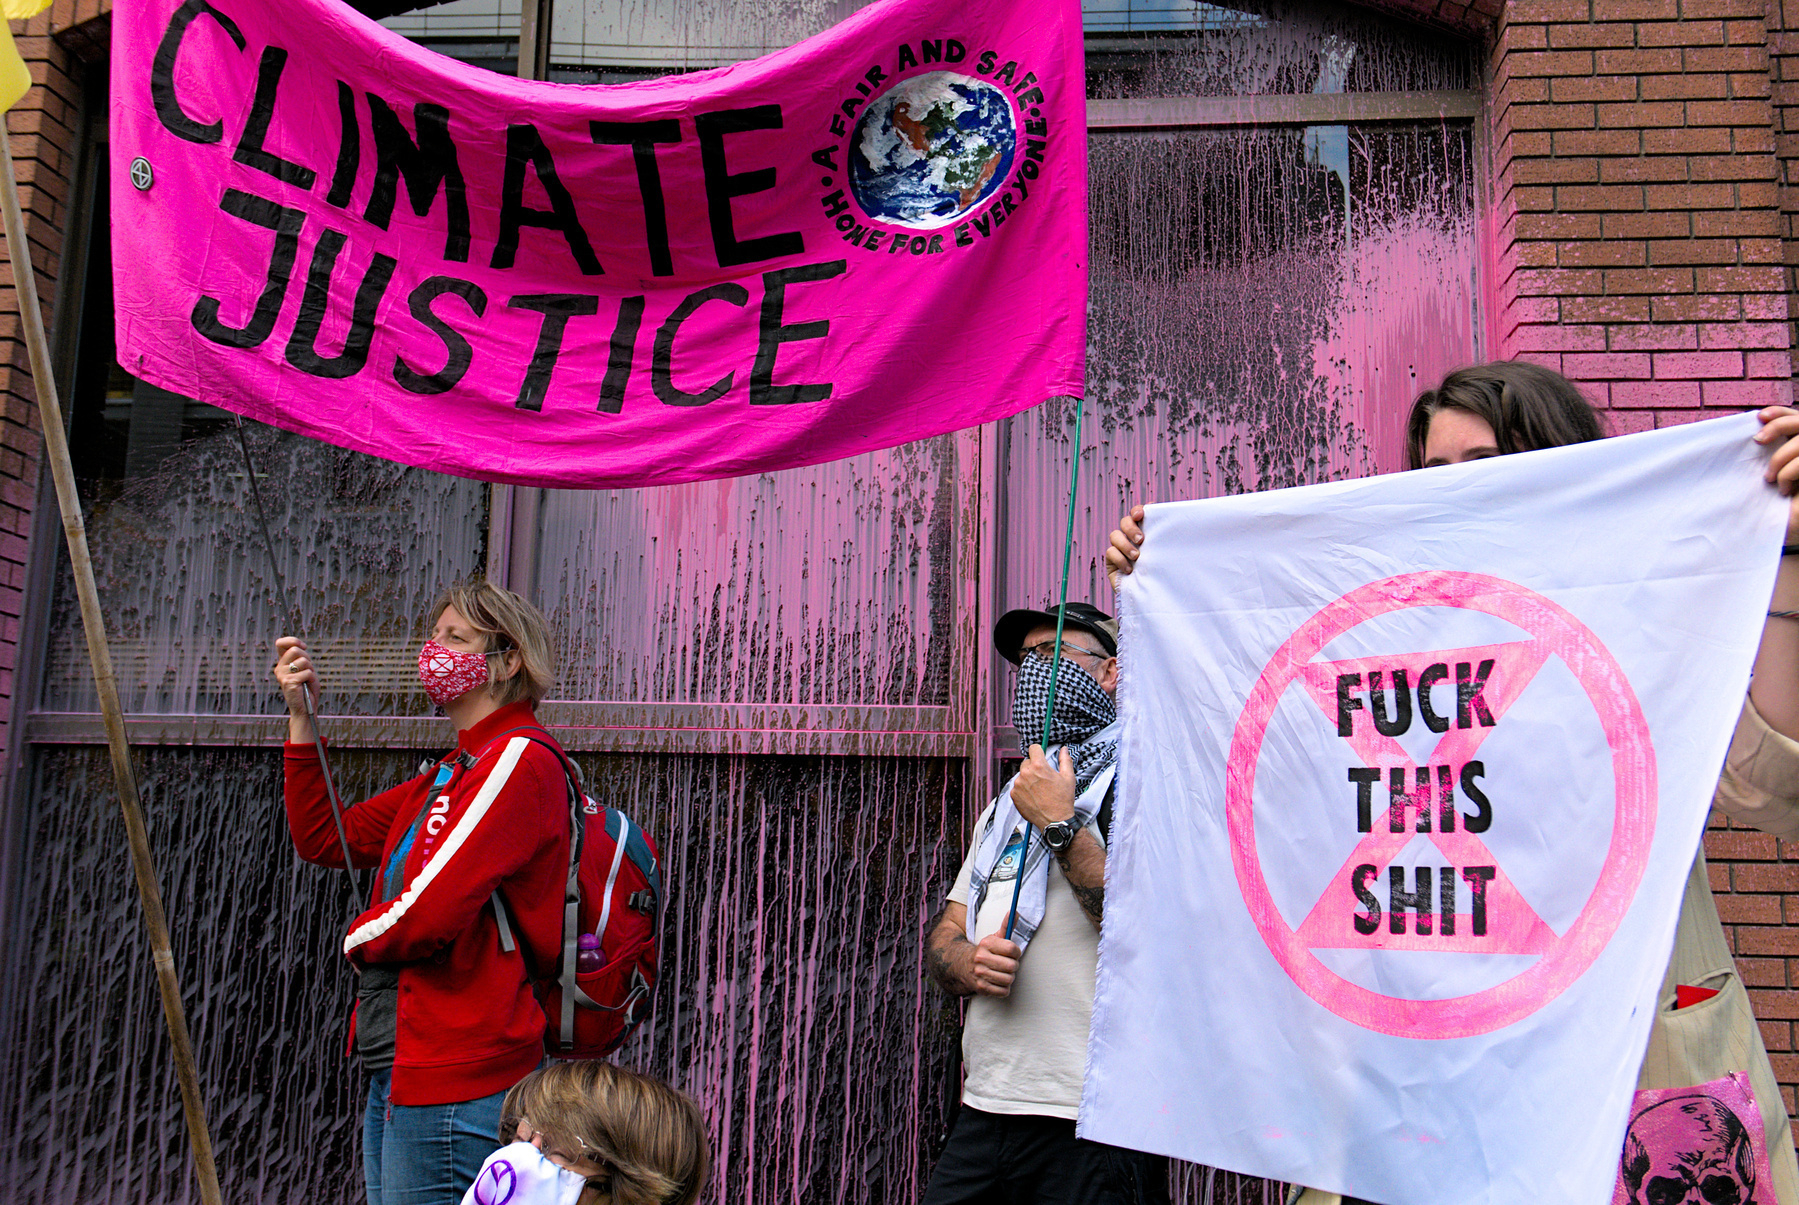 Photograph from a climate protest. Two people wearing covid masks wave a pink banner saying 'climate justice'. Another person holds a banner with a pink XR logo and the words 'fuck this shit'. There is pink painted splashed across the walls of the building behind